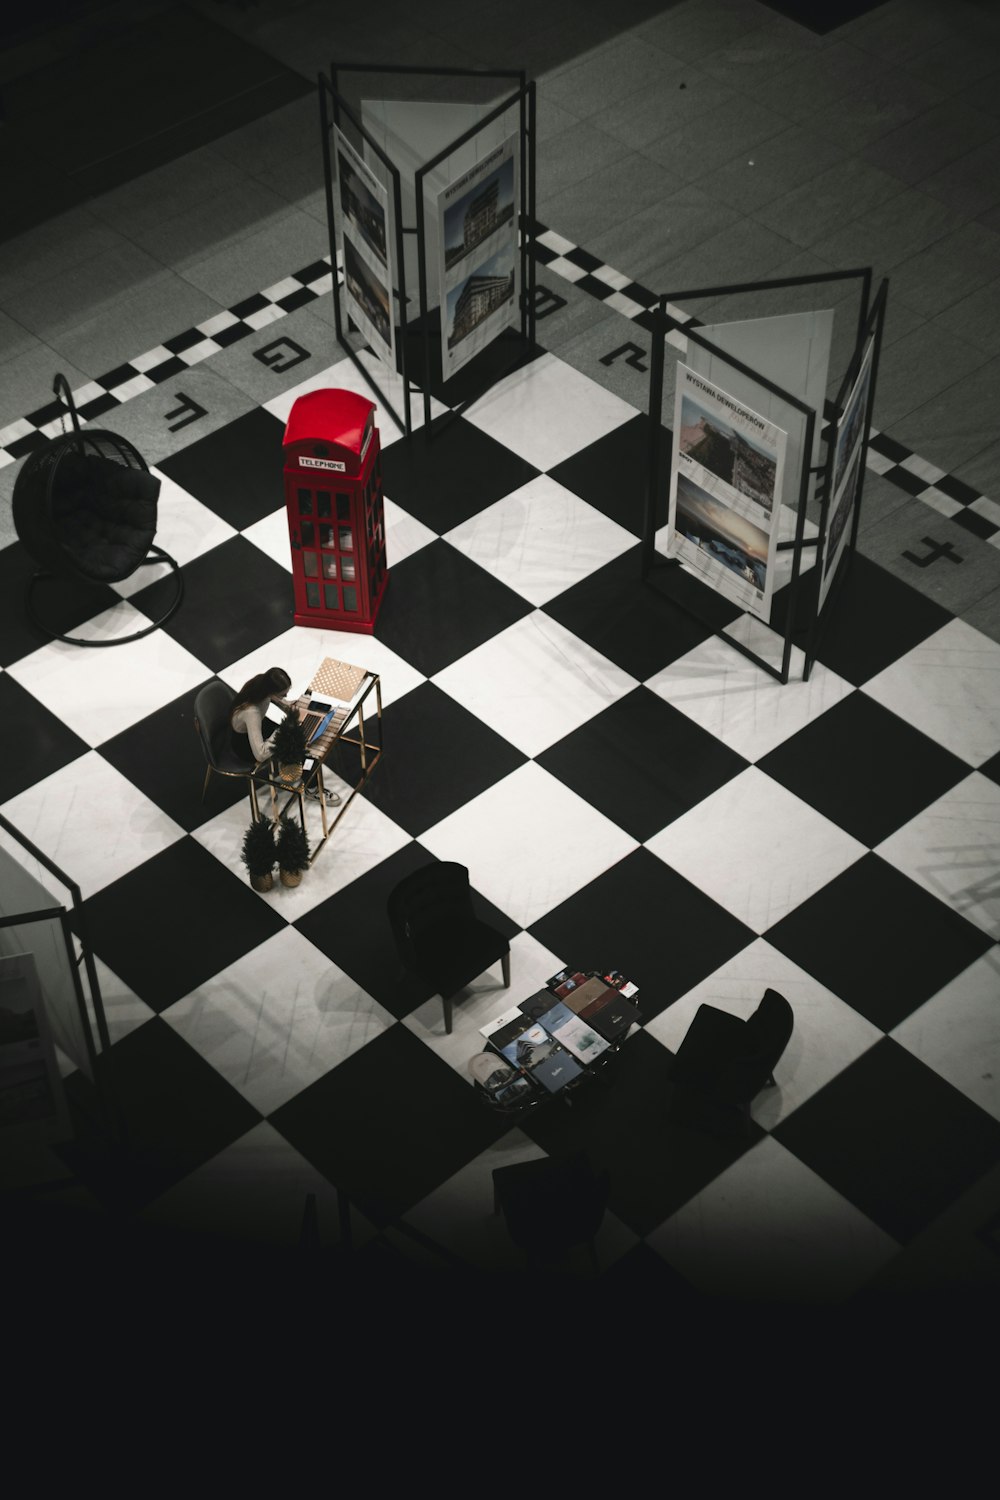 a black and white checkered floor with a red phone booth